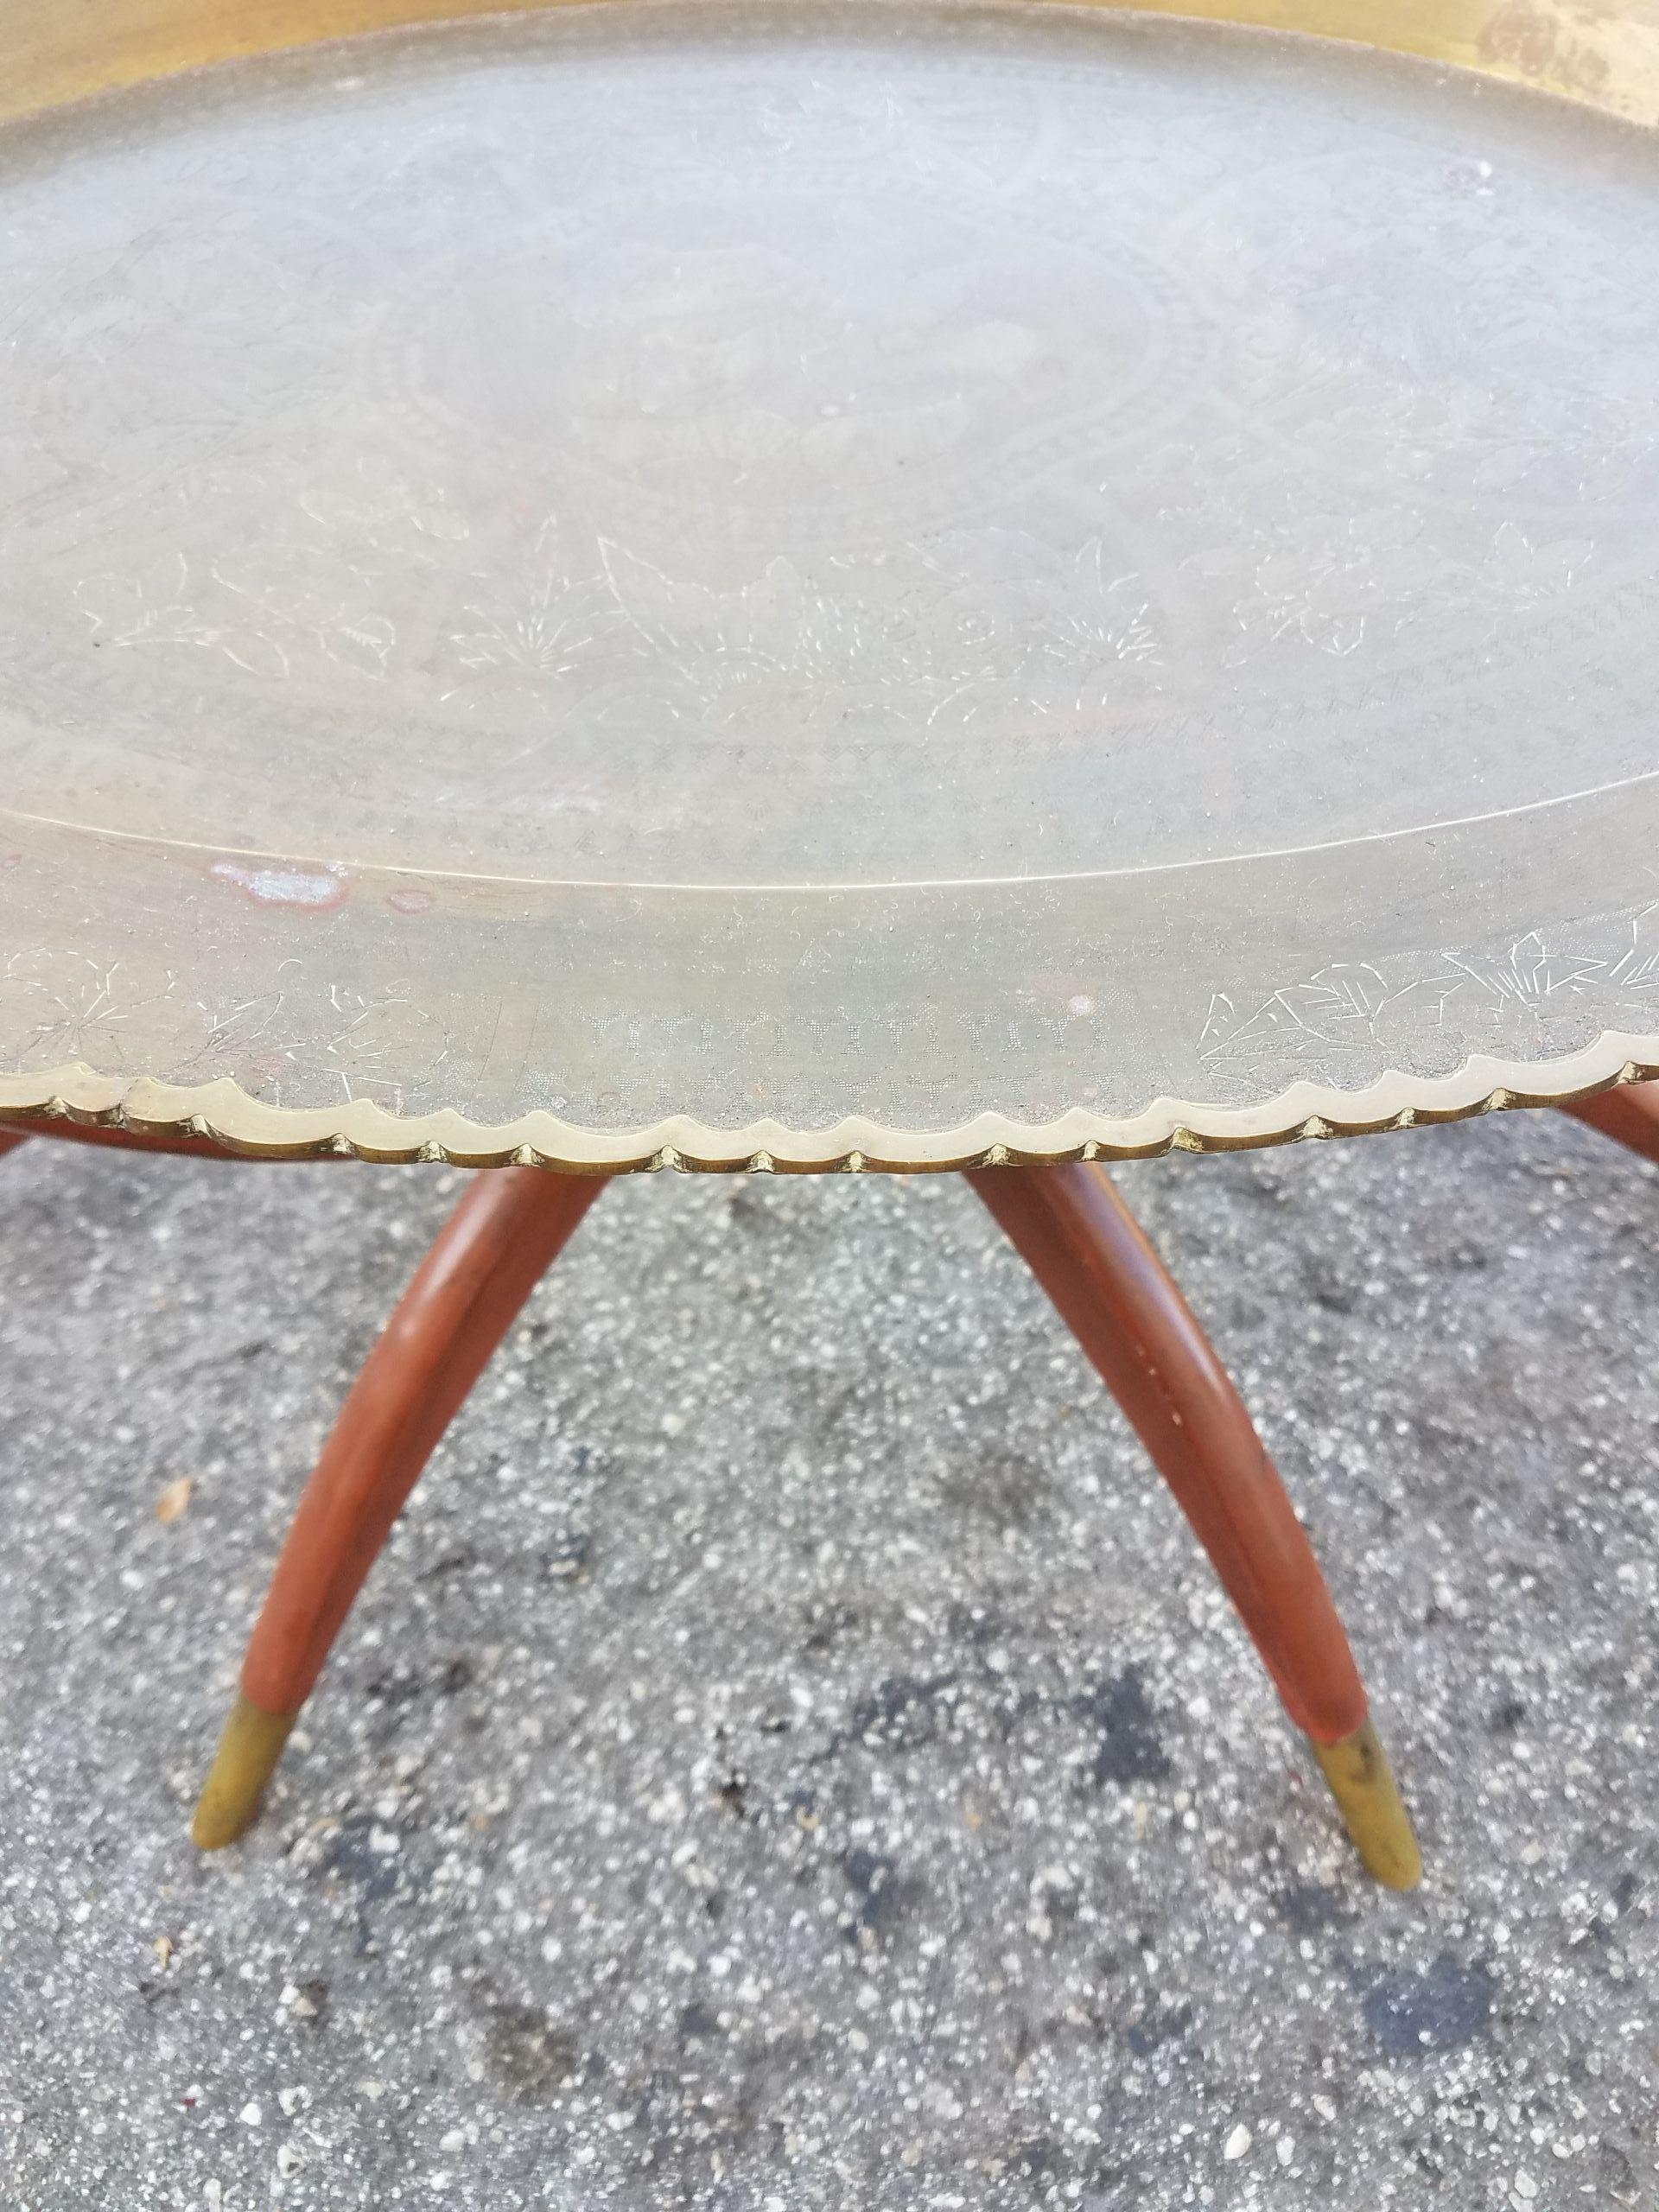 One of a kind Moroccan copper tray table, ideal as a coffee table or a side table. Very exotic. Oval shape and an amazing look. With its detailed copper hammering on top, this table will sure be a excellent add-on to your home or office decor. It